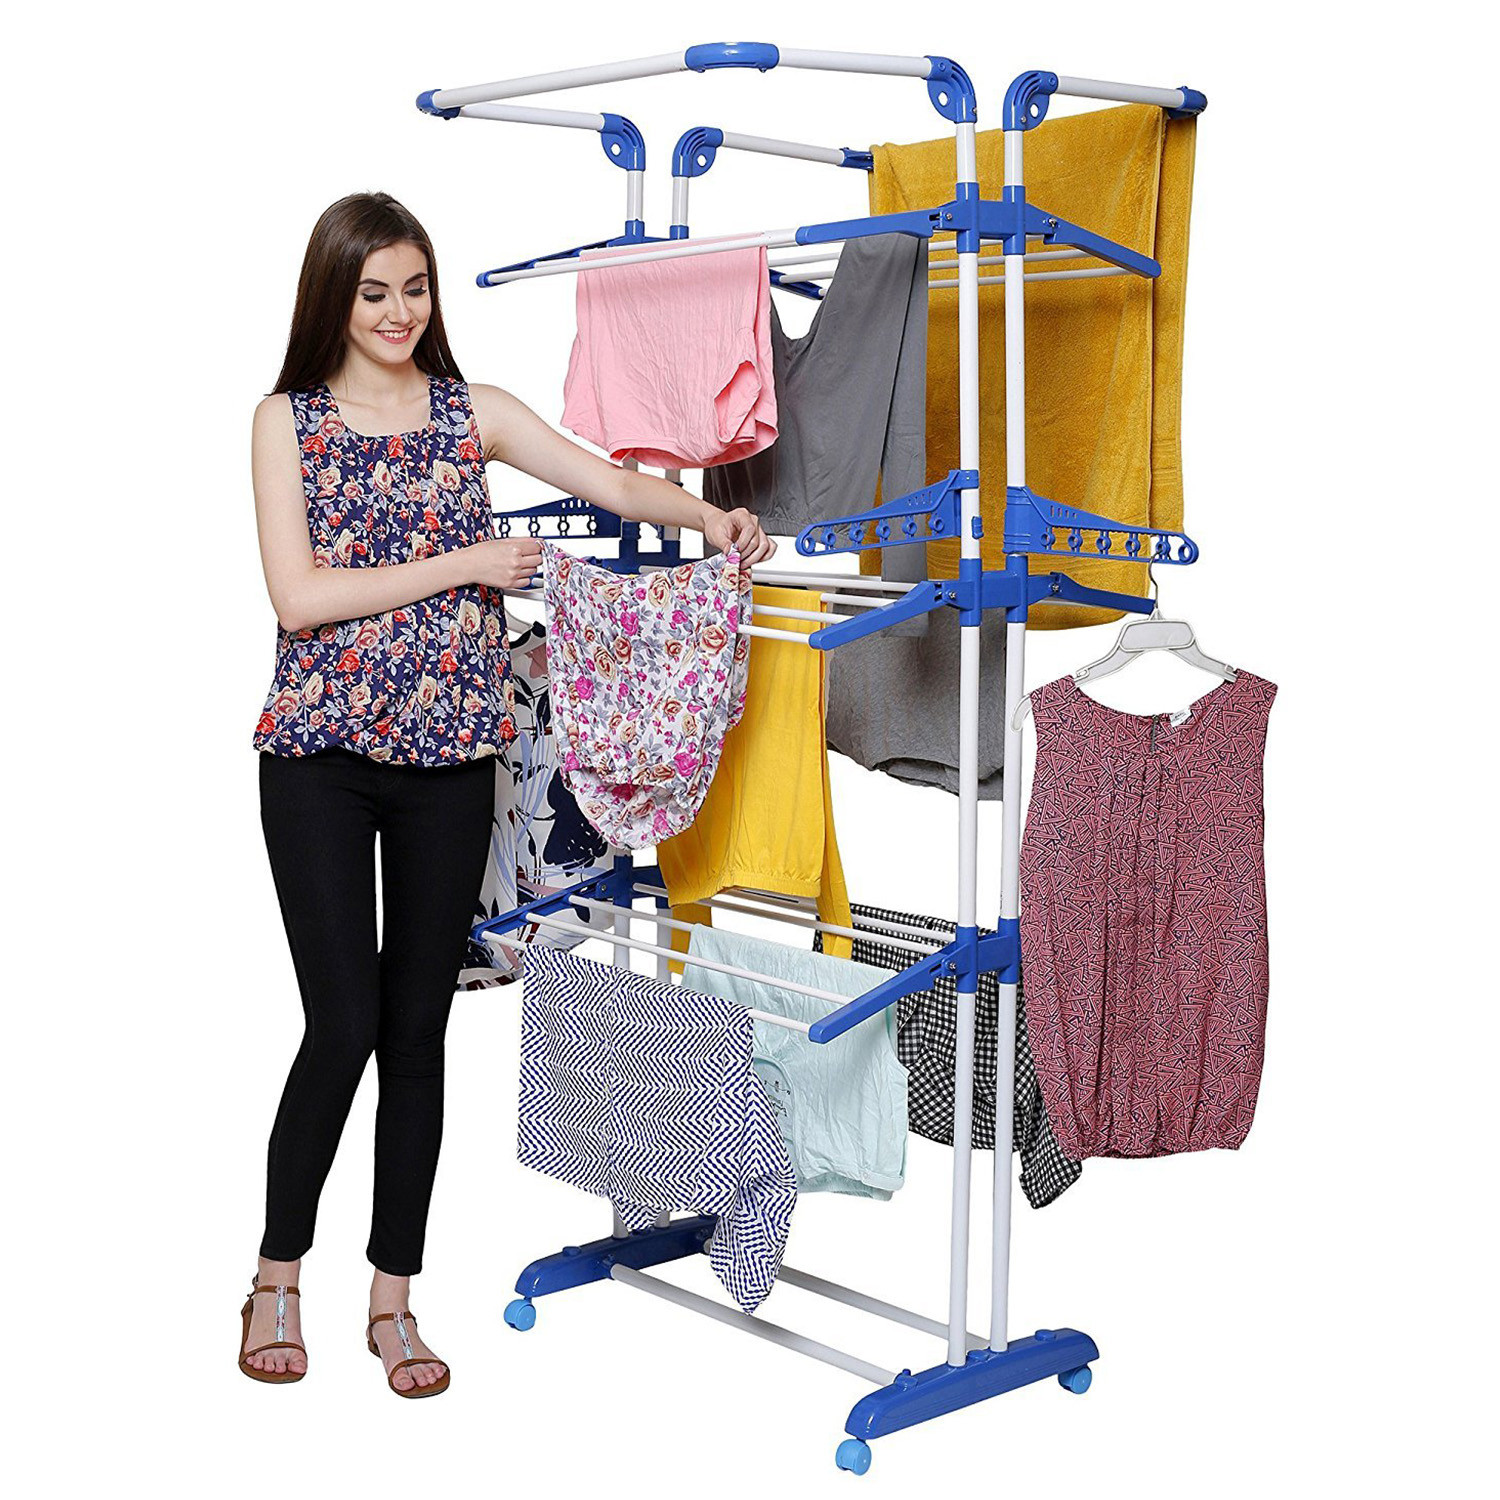 Kuber Industries Stainless Steel 4-Tier Movable Laundry Clothes Rack|Cloth Drying Stand With Wheels for Balcony & Outdoor (Blue)